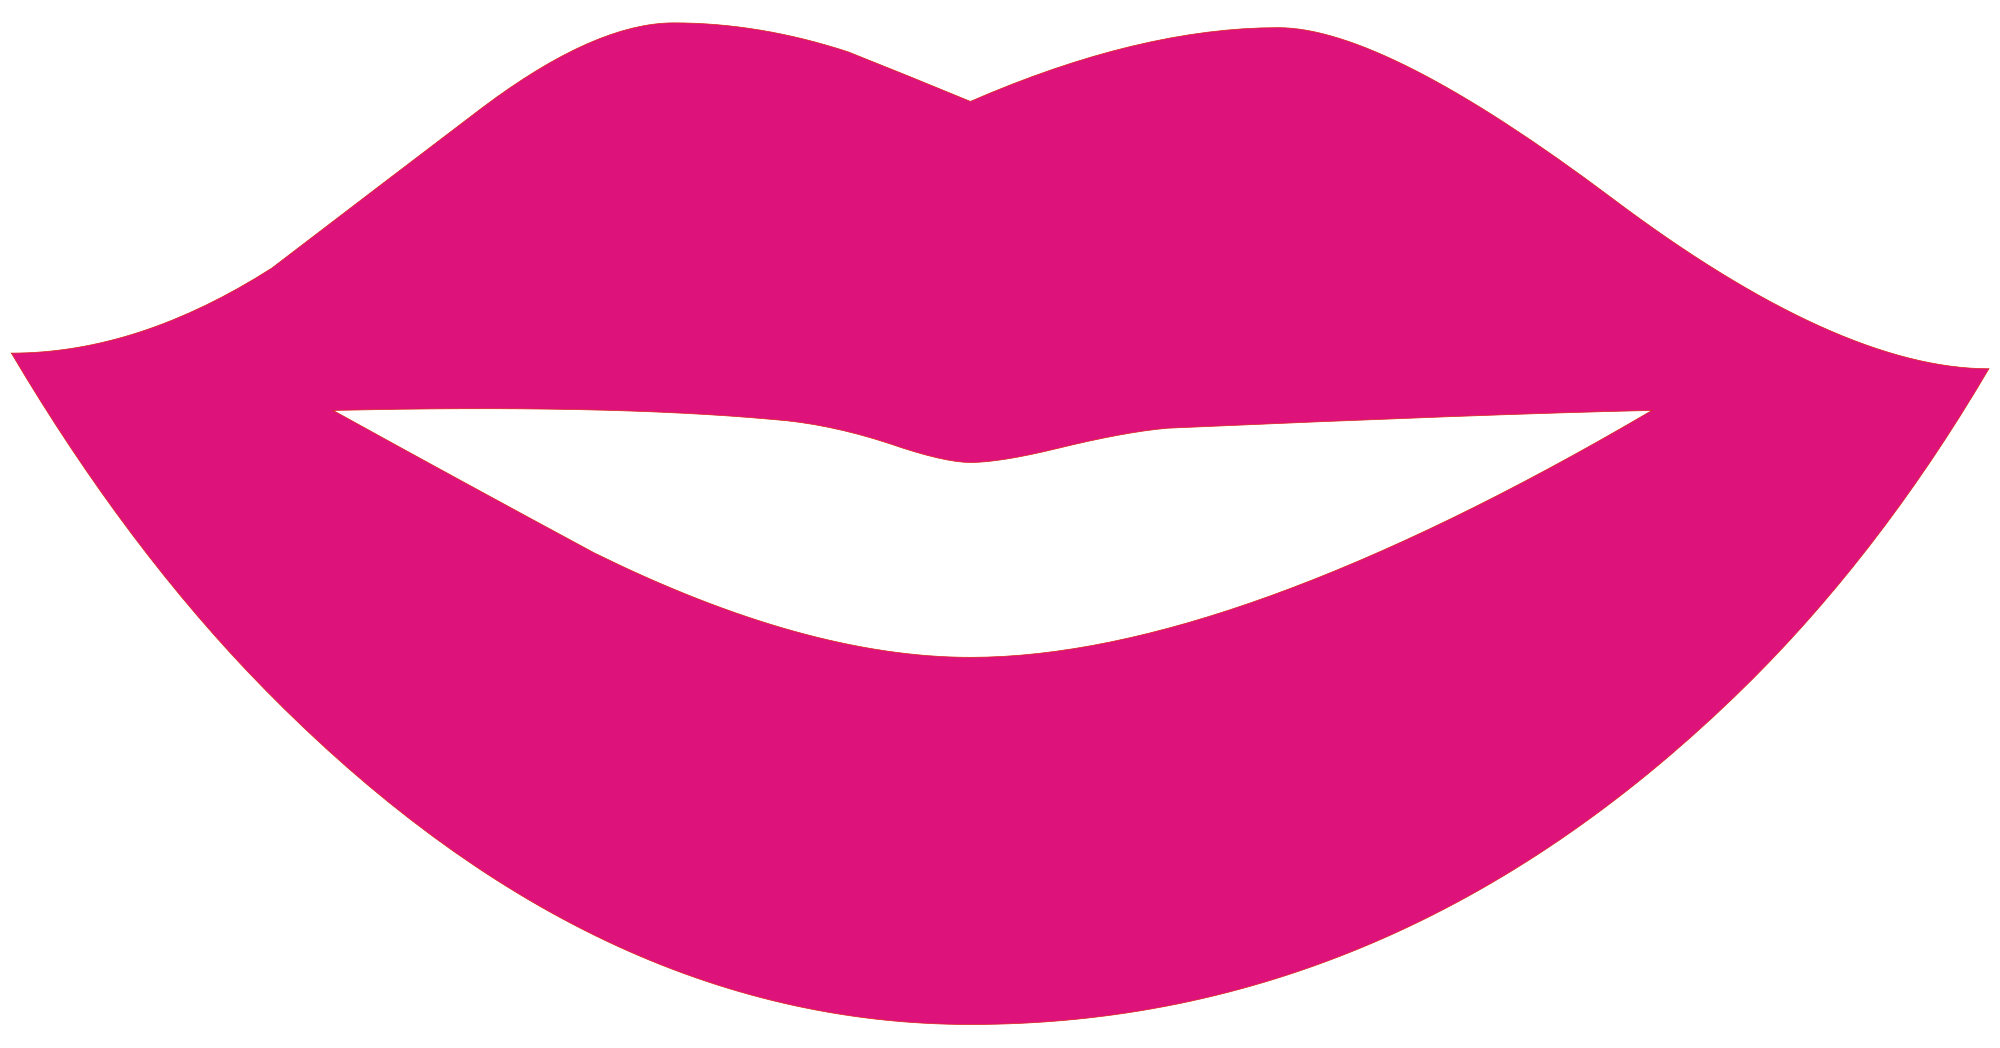 Free Lips Clipart photo booth, Download Free Clip Art on